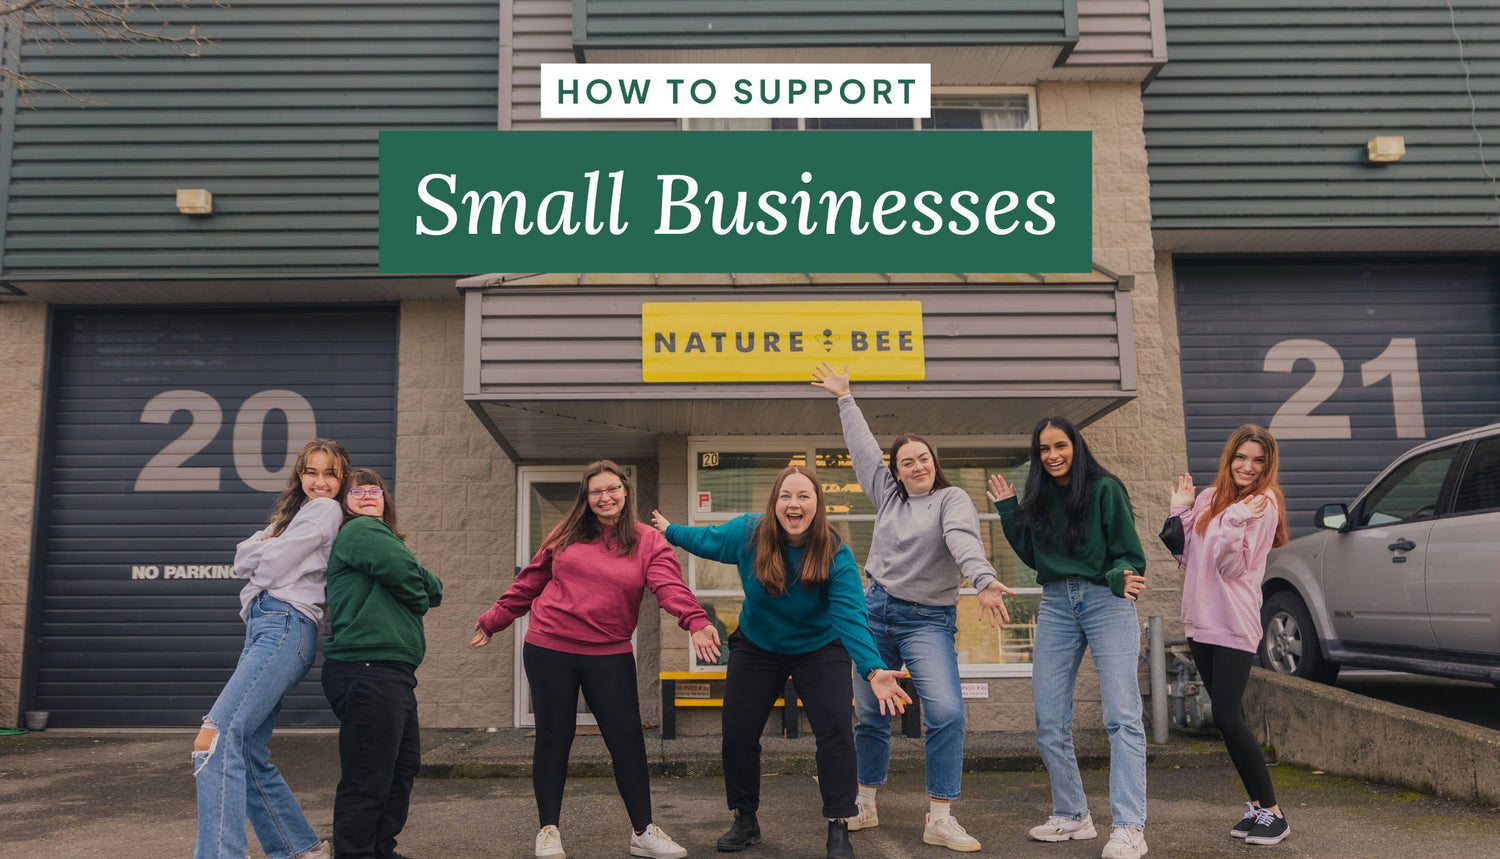 Tips to Support Small Businesses this Holiday Season